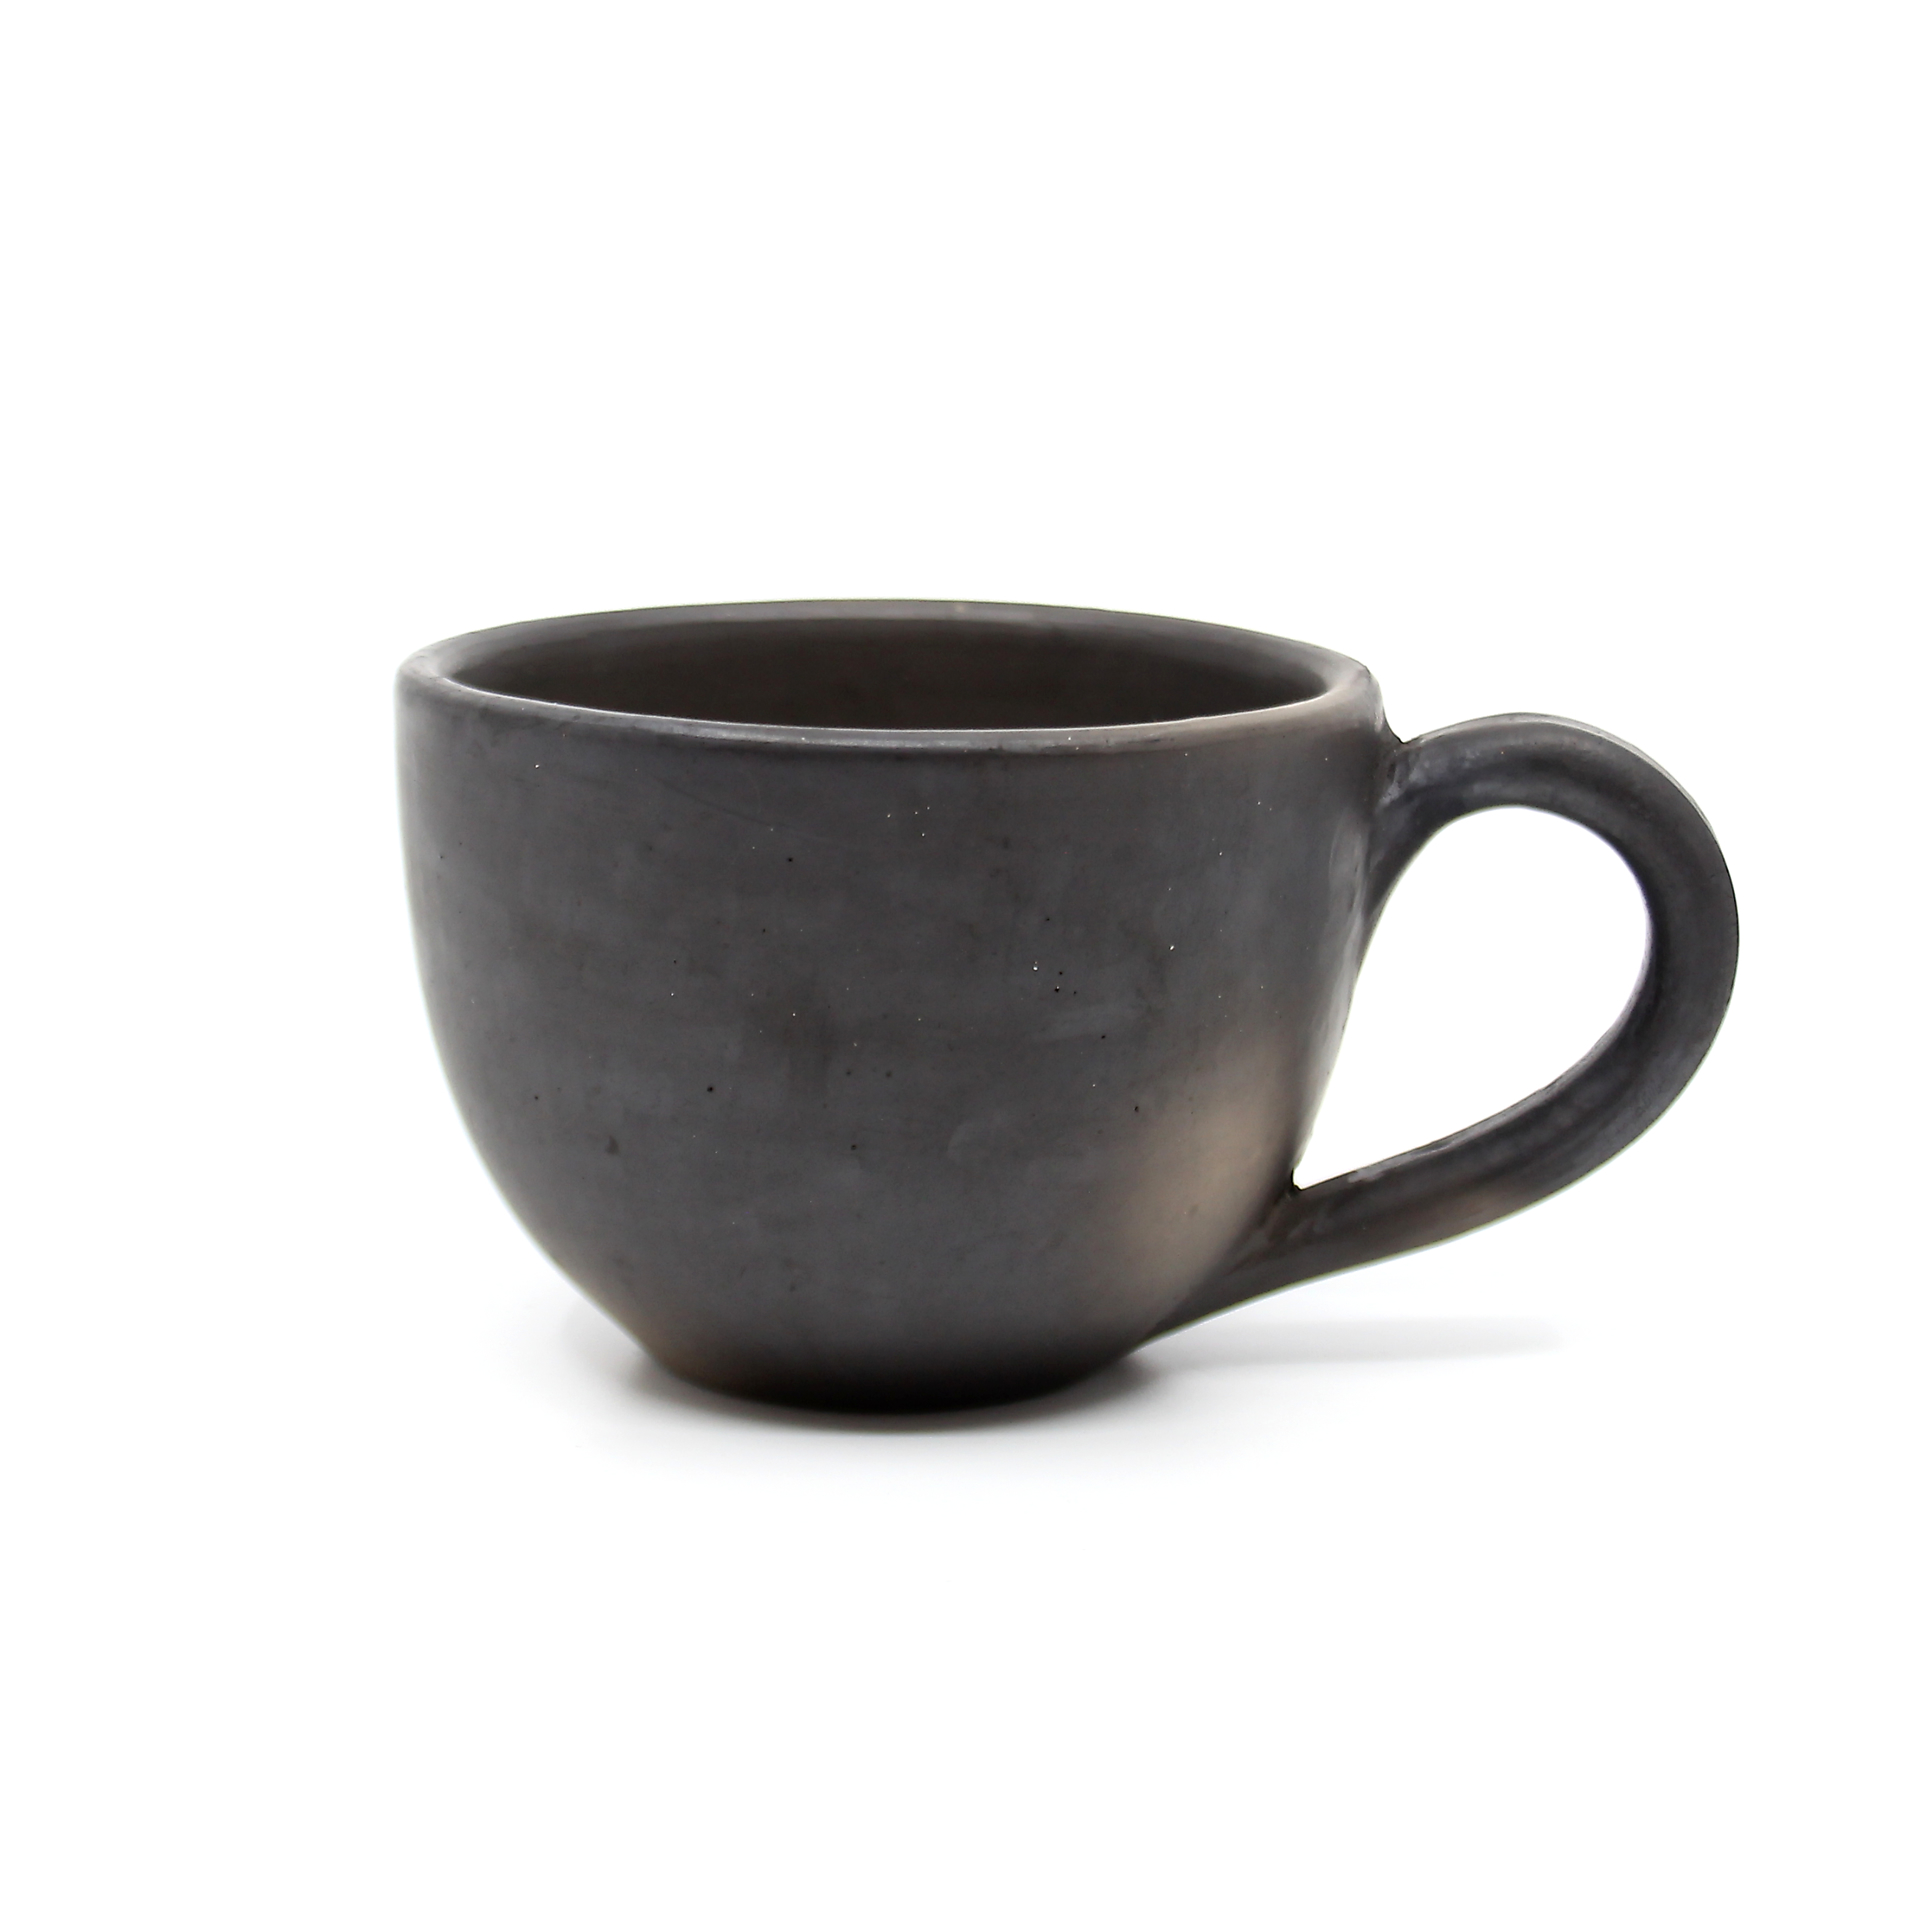 La Negra Coffee Cup by Colectivo 1050°